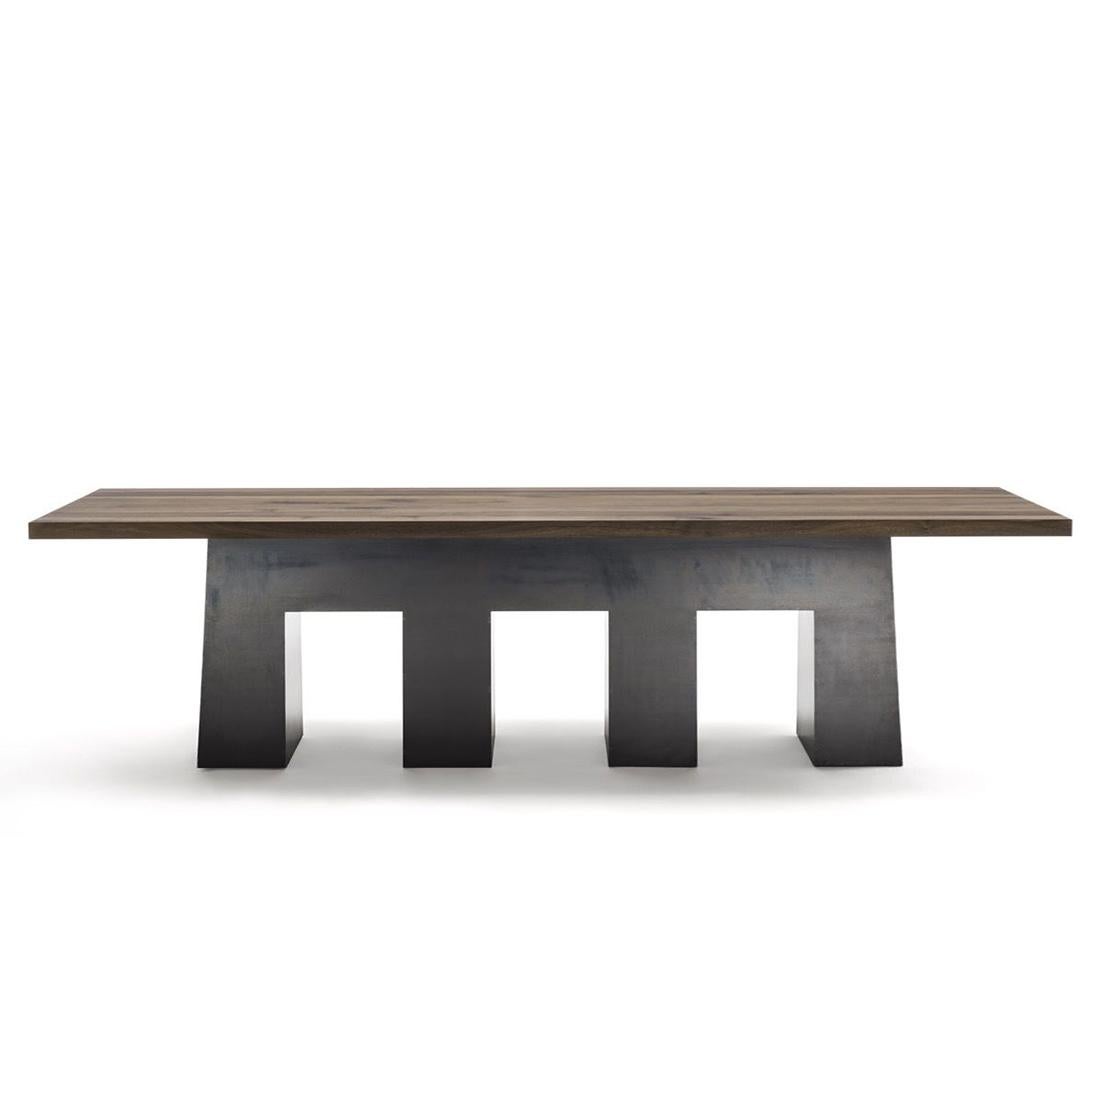 Dining table basic with solid walnut wood top and
with solid forged iron base in raw iron finish.
Also available with solid oak top.
Available in:
L 240 x D 110 x H 75cm, price: 8900,00€
L 260 x D 110 x H 75cm, price: 9900,00€
L 280 x D 110 x